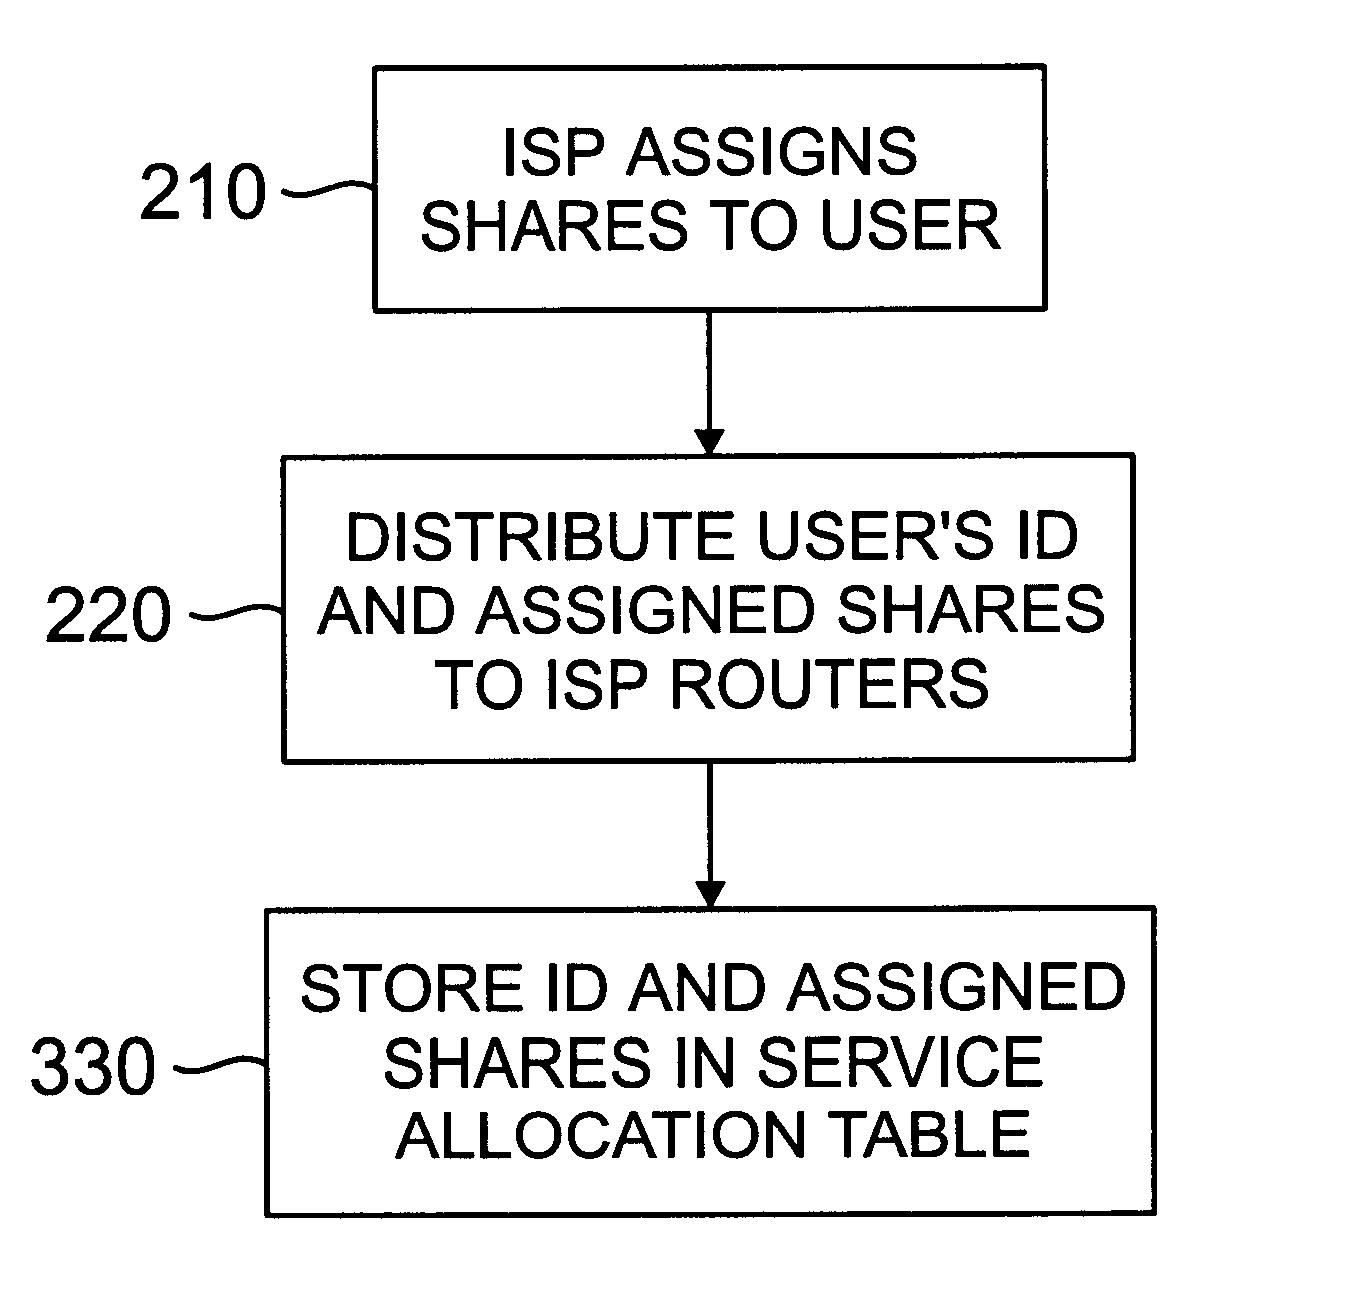 Allocation of bandwidth in a packet switched network among subscribers of a service provider